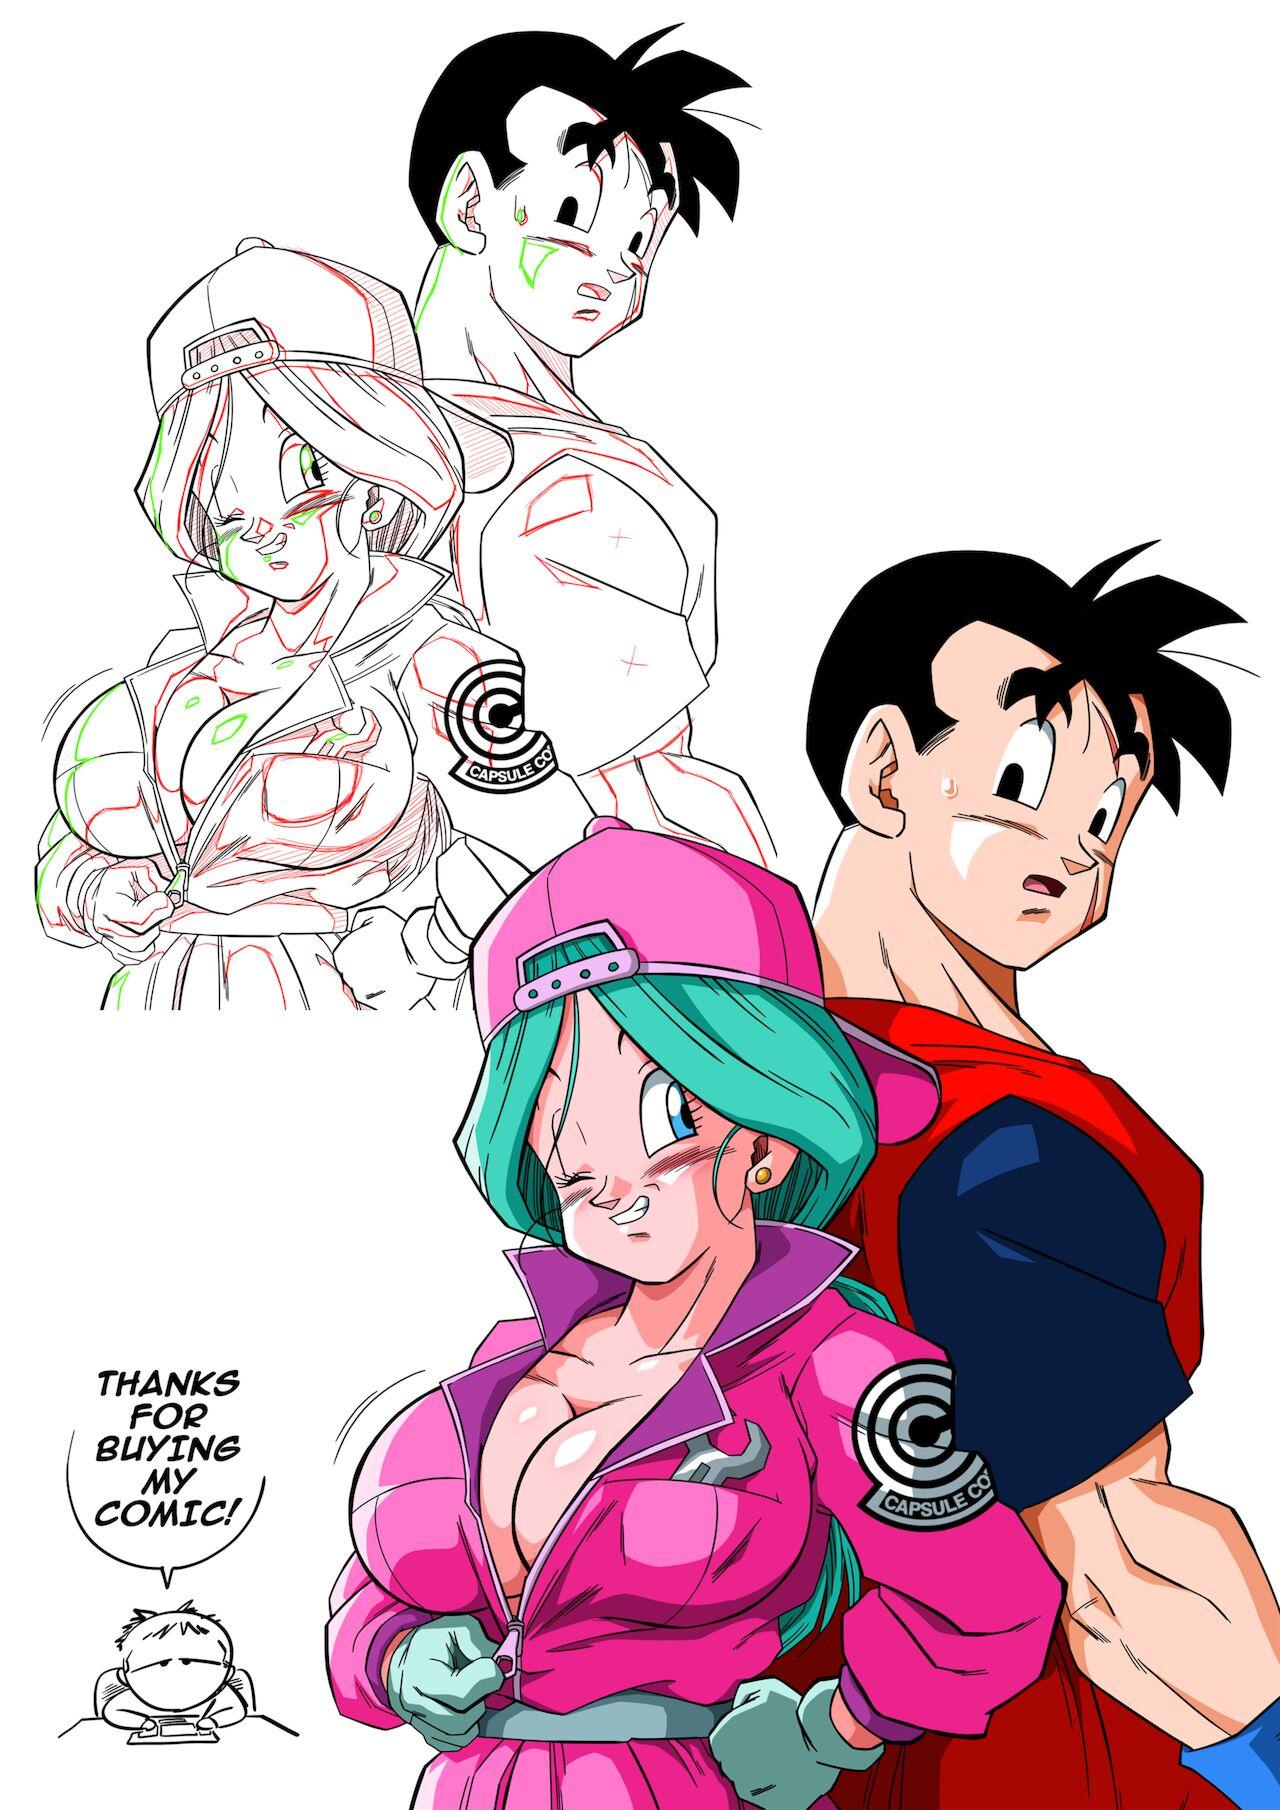 Lost of sex in this Future! - BULMA and GOHAN 16